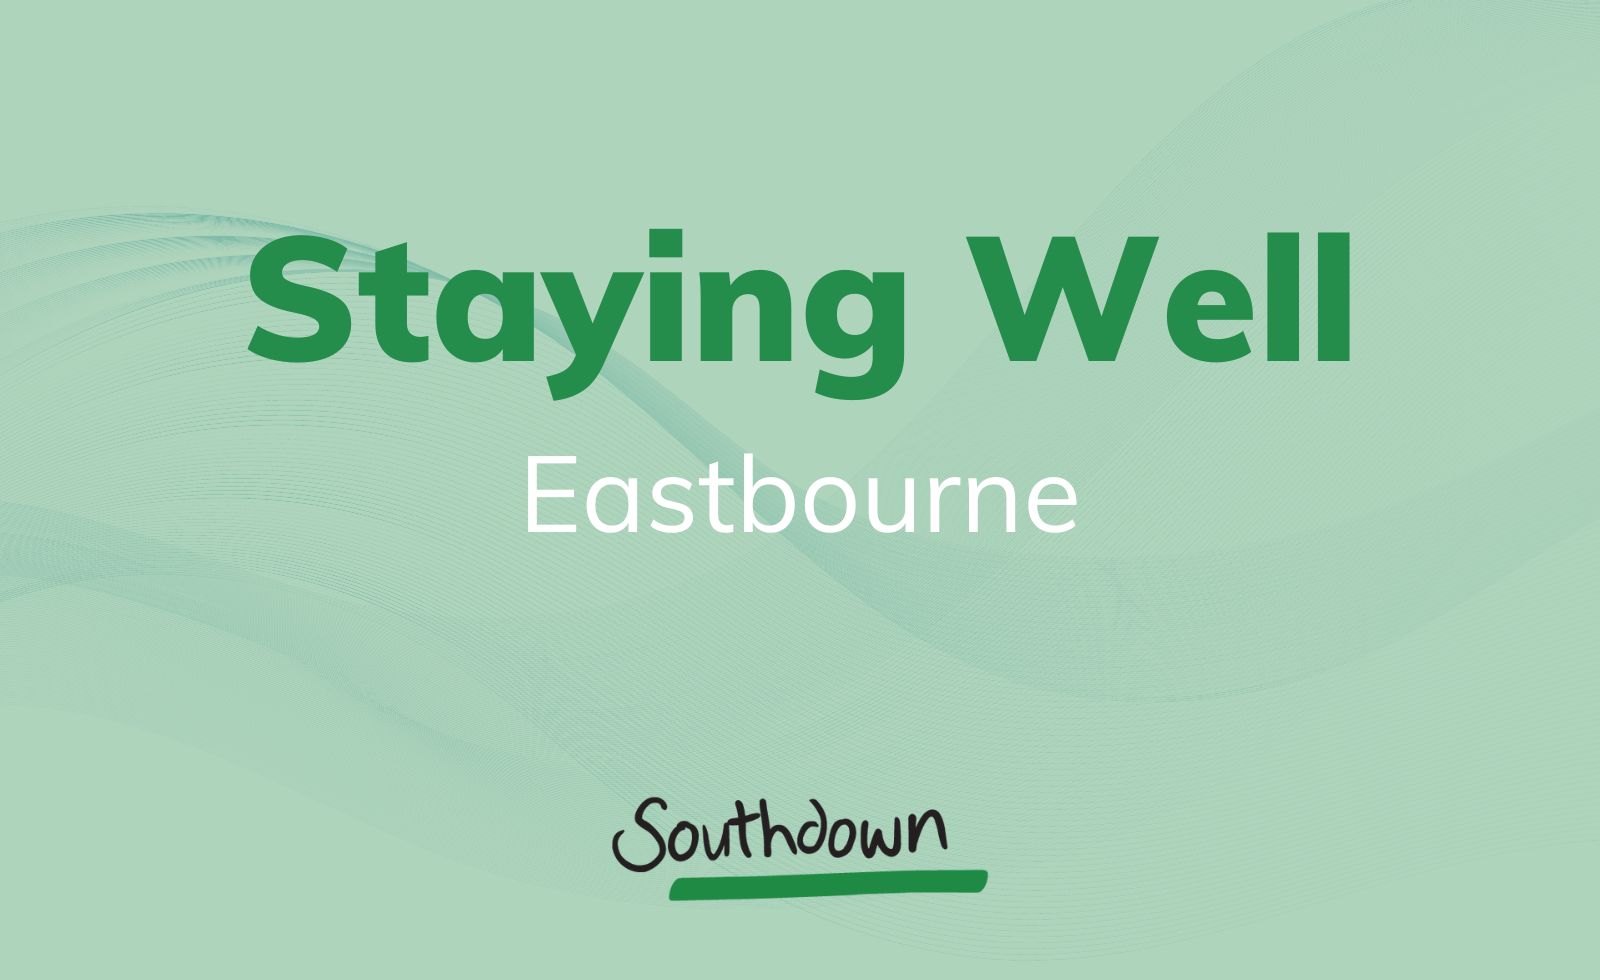 Pale green pattered background with text that reads Staying Well Eastbourne. Also has the Southdown logo.